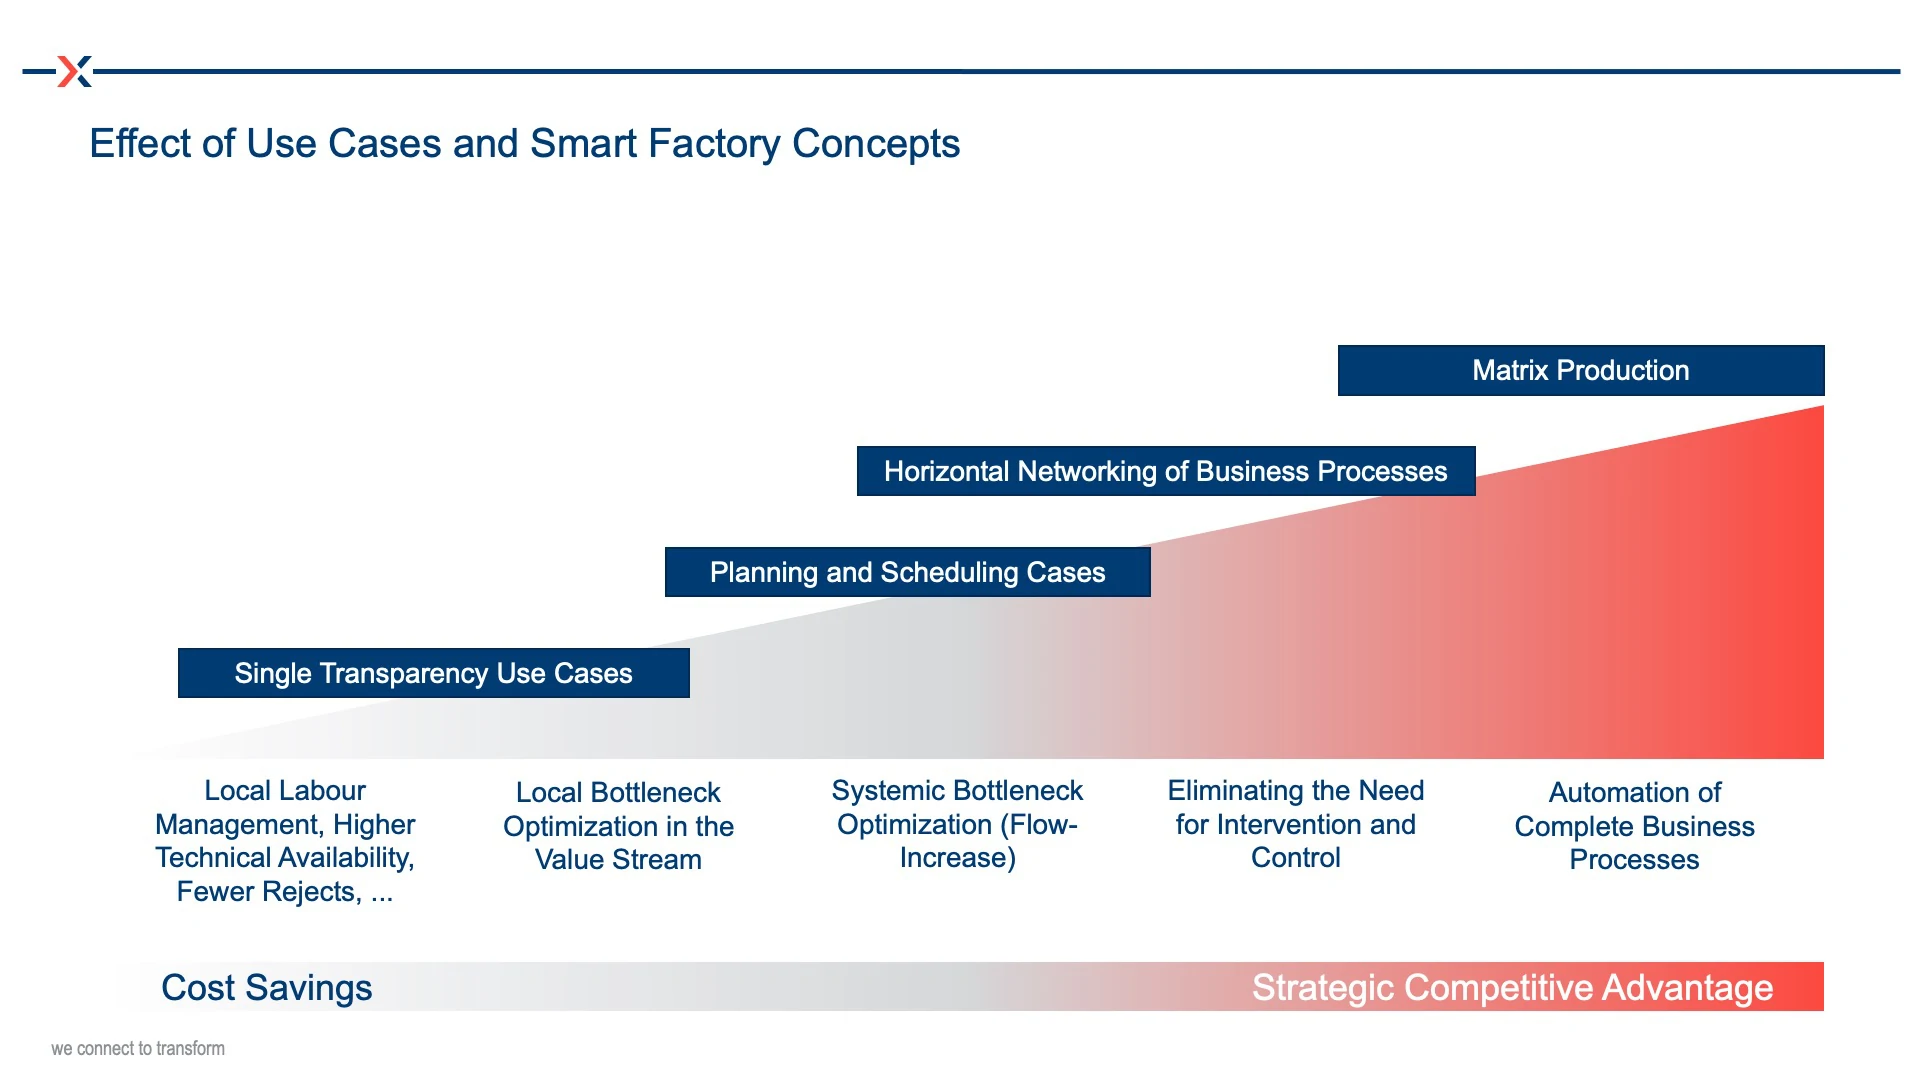 Effect of use cases and Smart Factory concepts on the entire end-2-end value creation process.